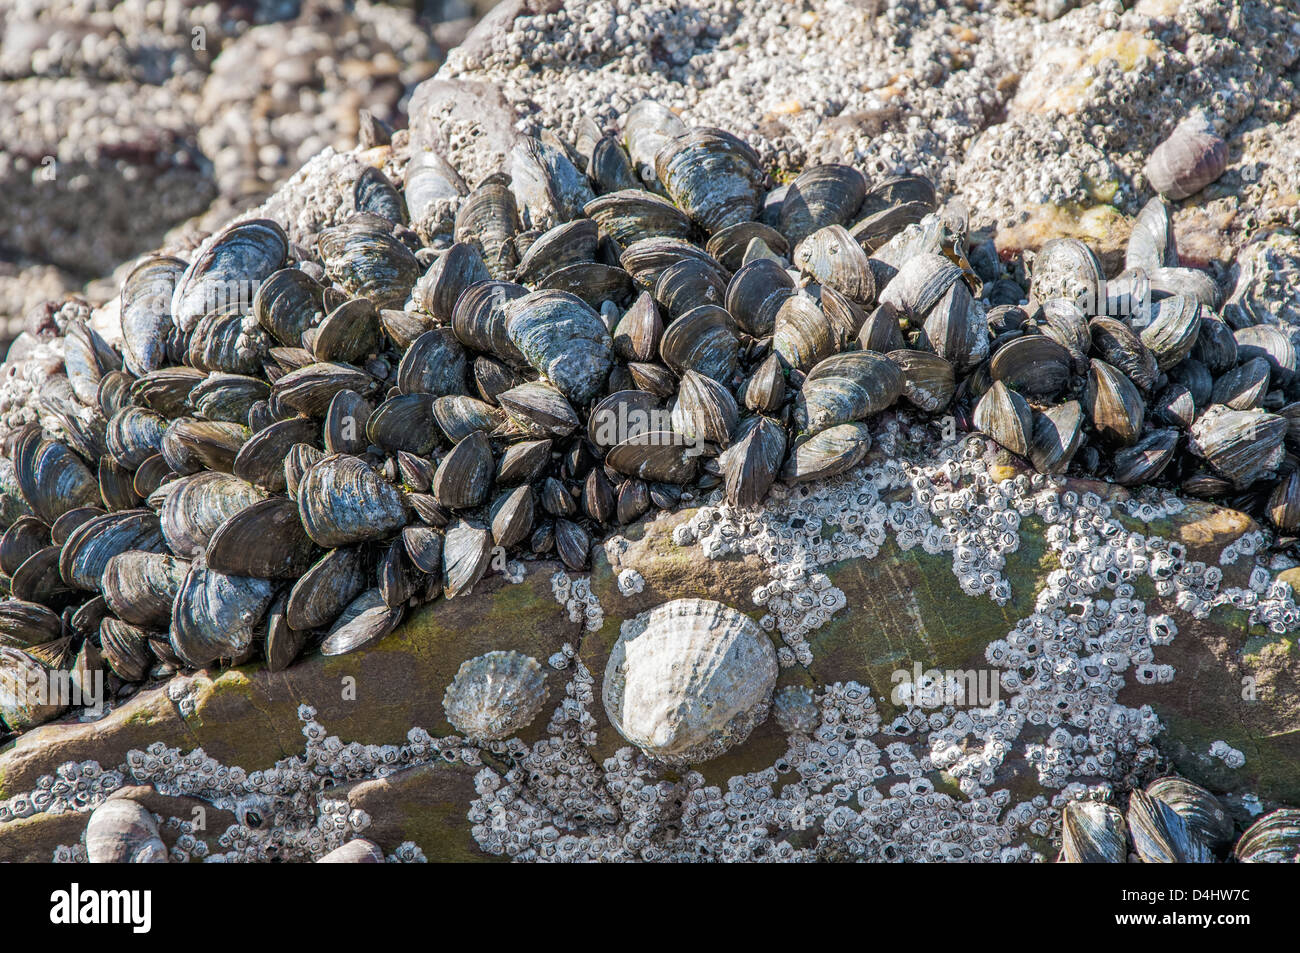 Barnacles, mussels and limpets on rocks in the intertidal zone Stock Photo